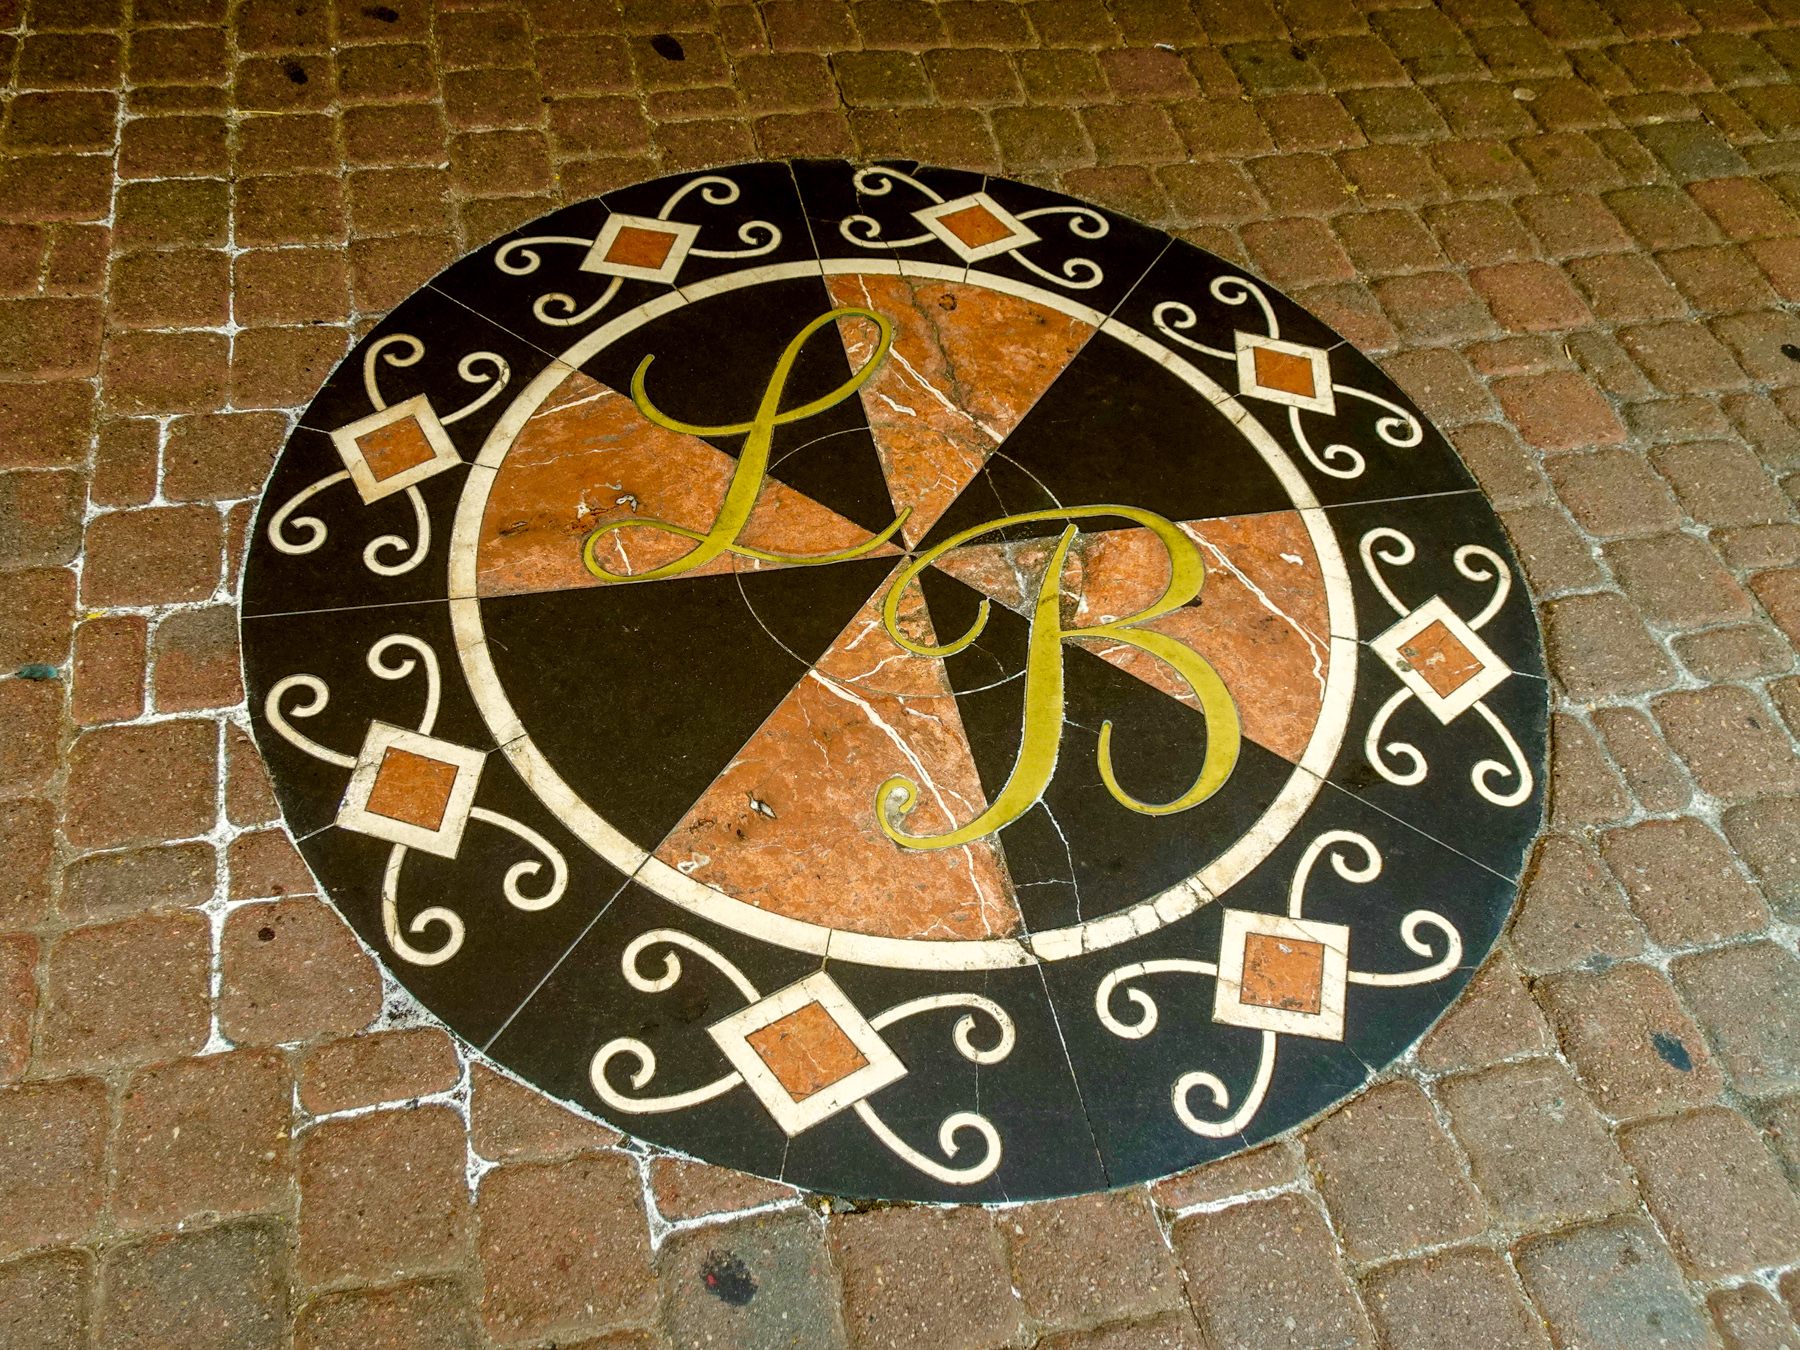 A circular mosaic set into the sidewalk, featuring the initials LB and decorative elements. The design is vaguely reminiscent of a dart board.